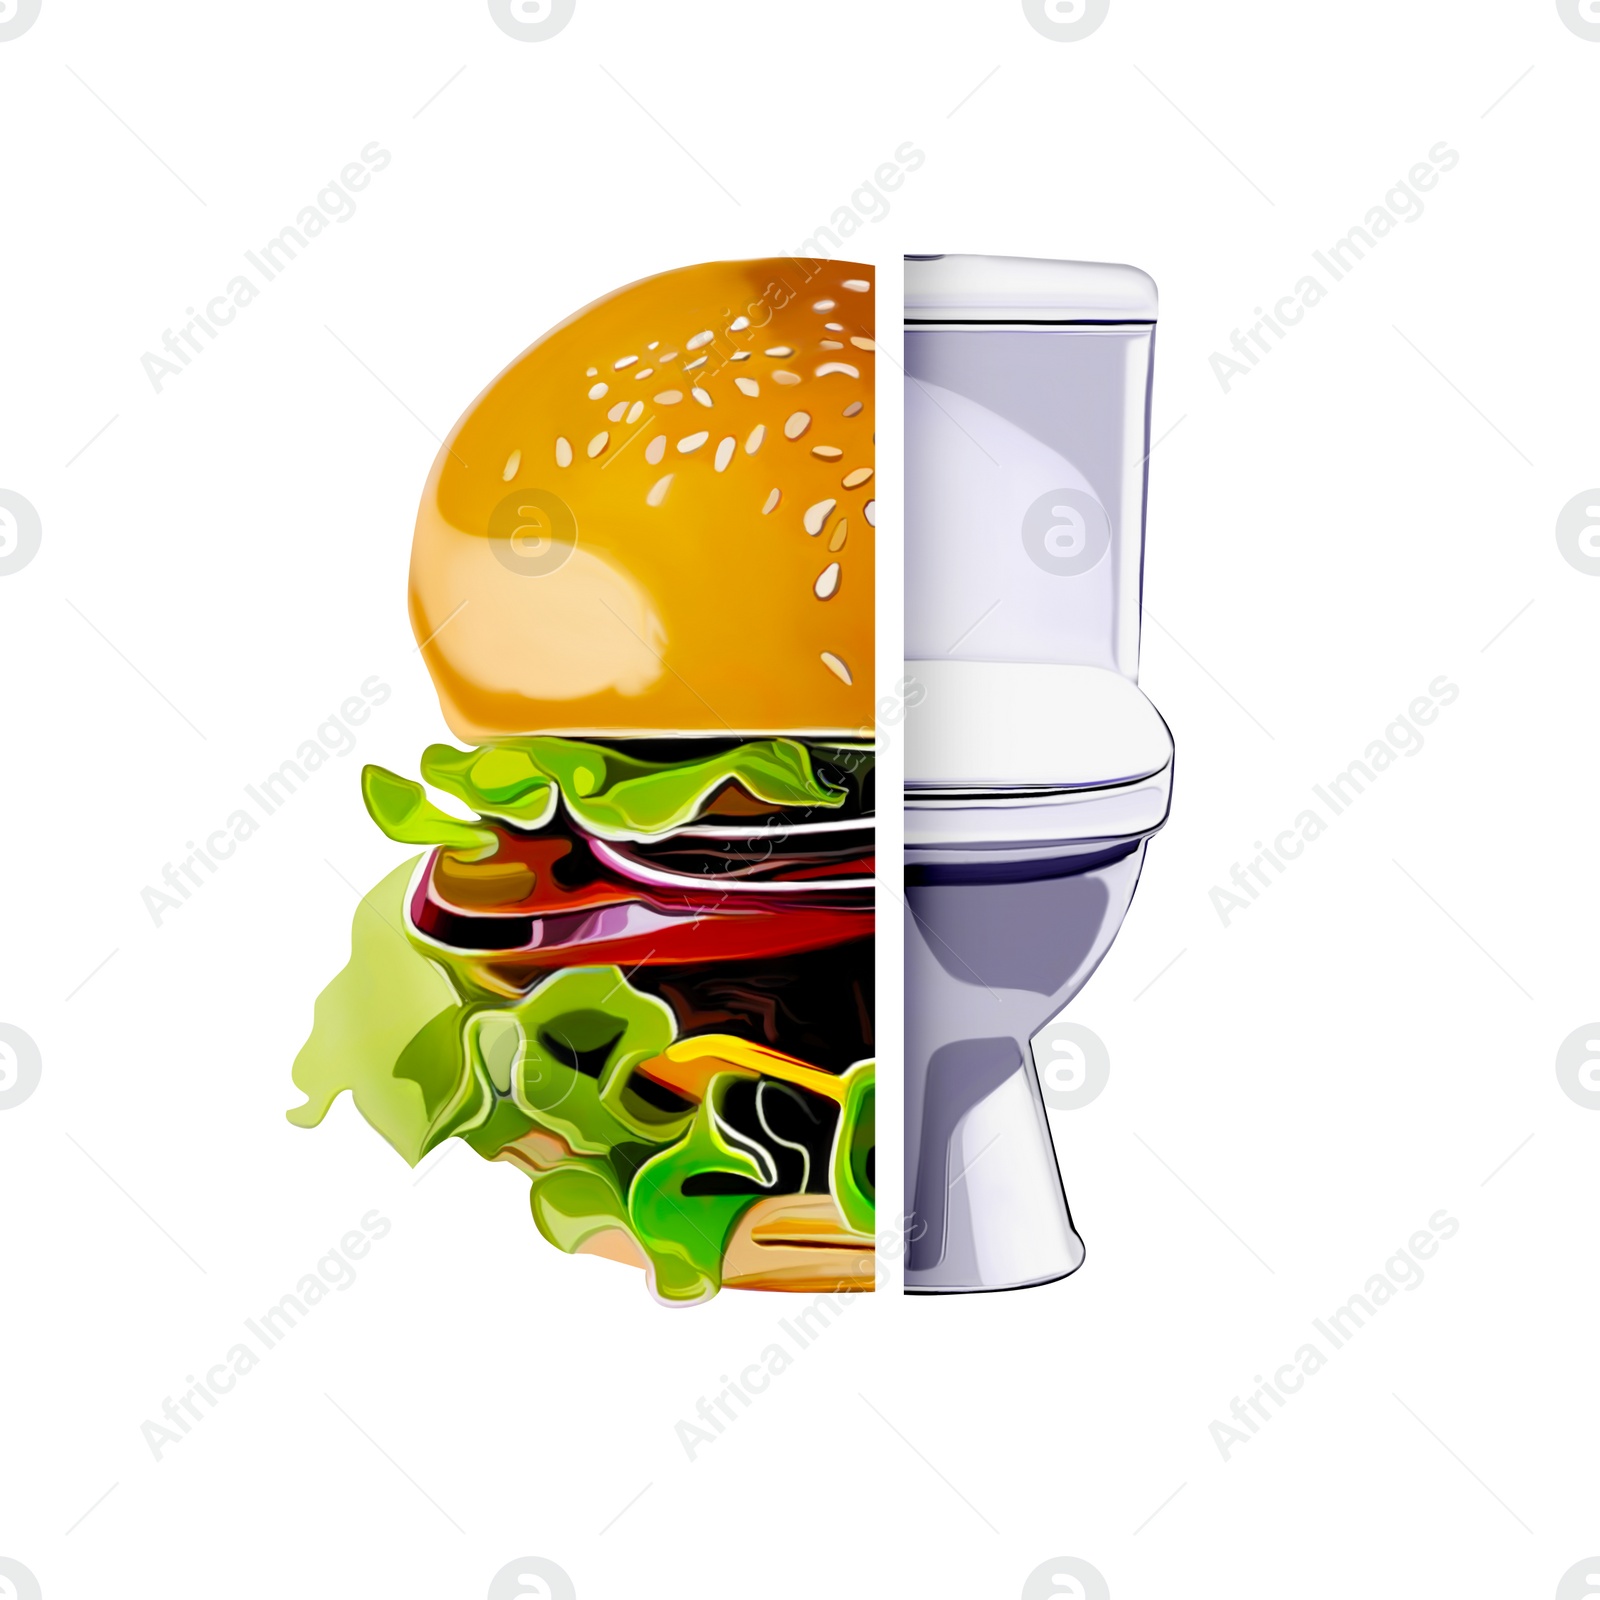 Illustration of Bulimia - eating disorder.  burger and toilet bowl on white background, collage